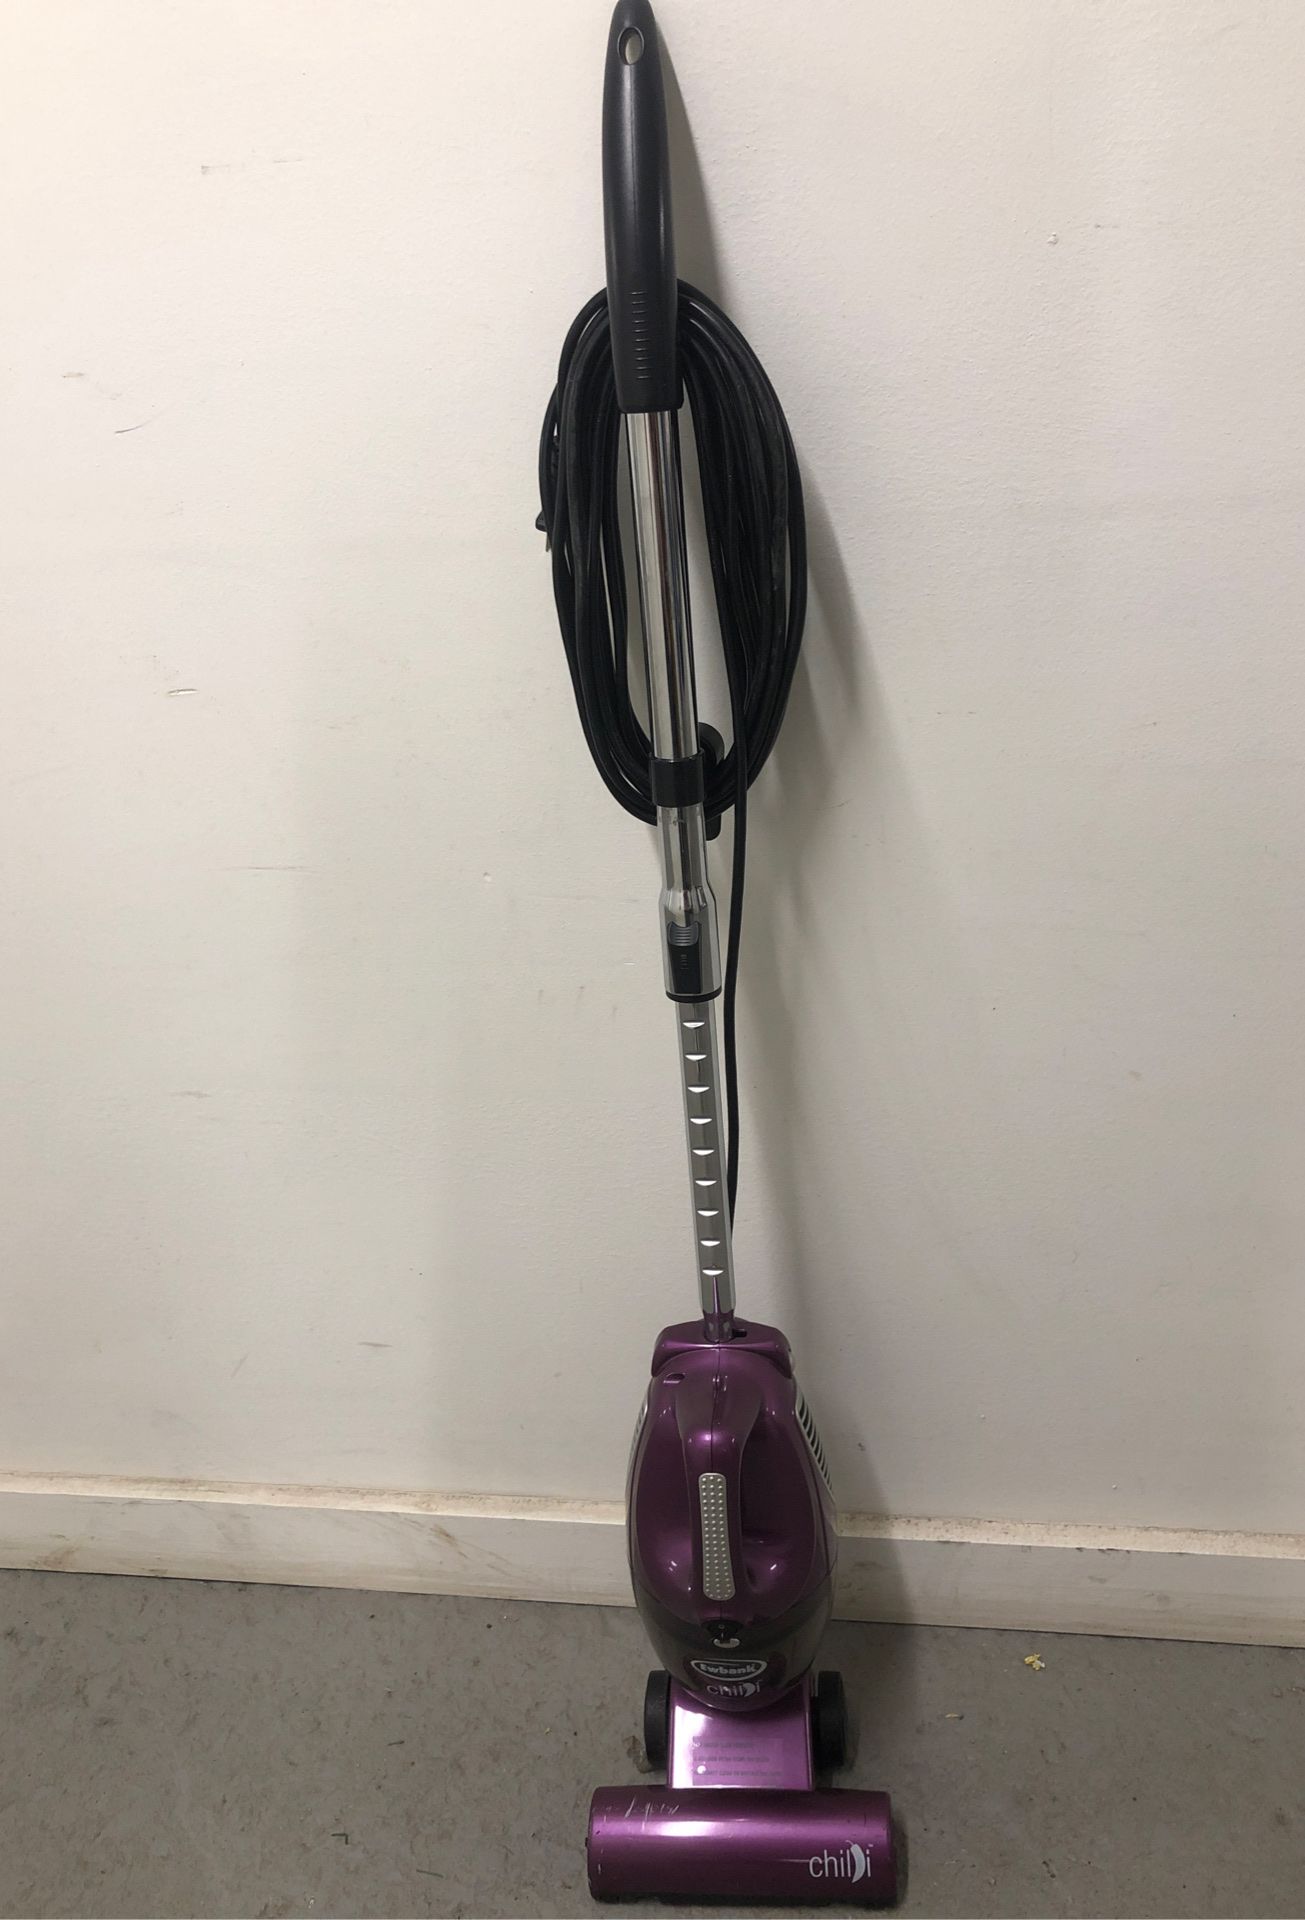 Very good condition working vacuum